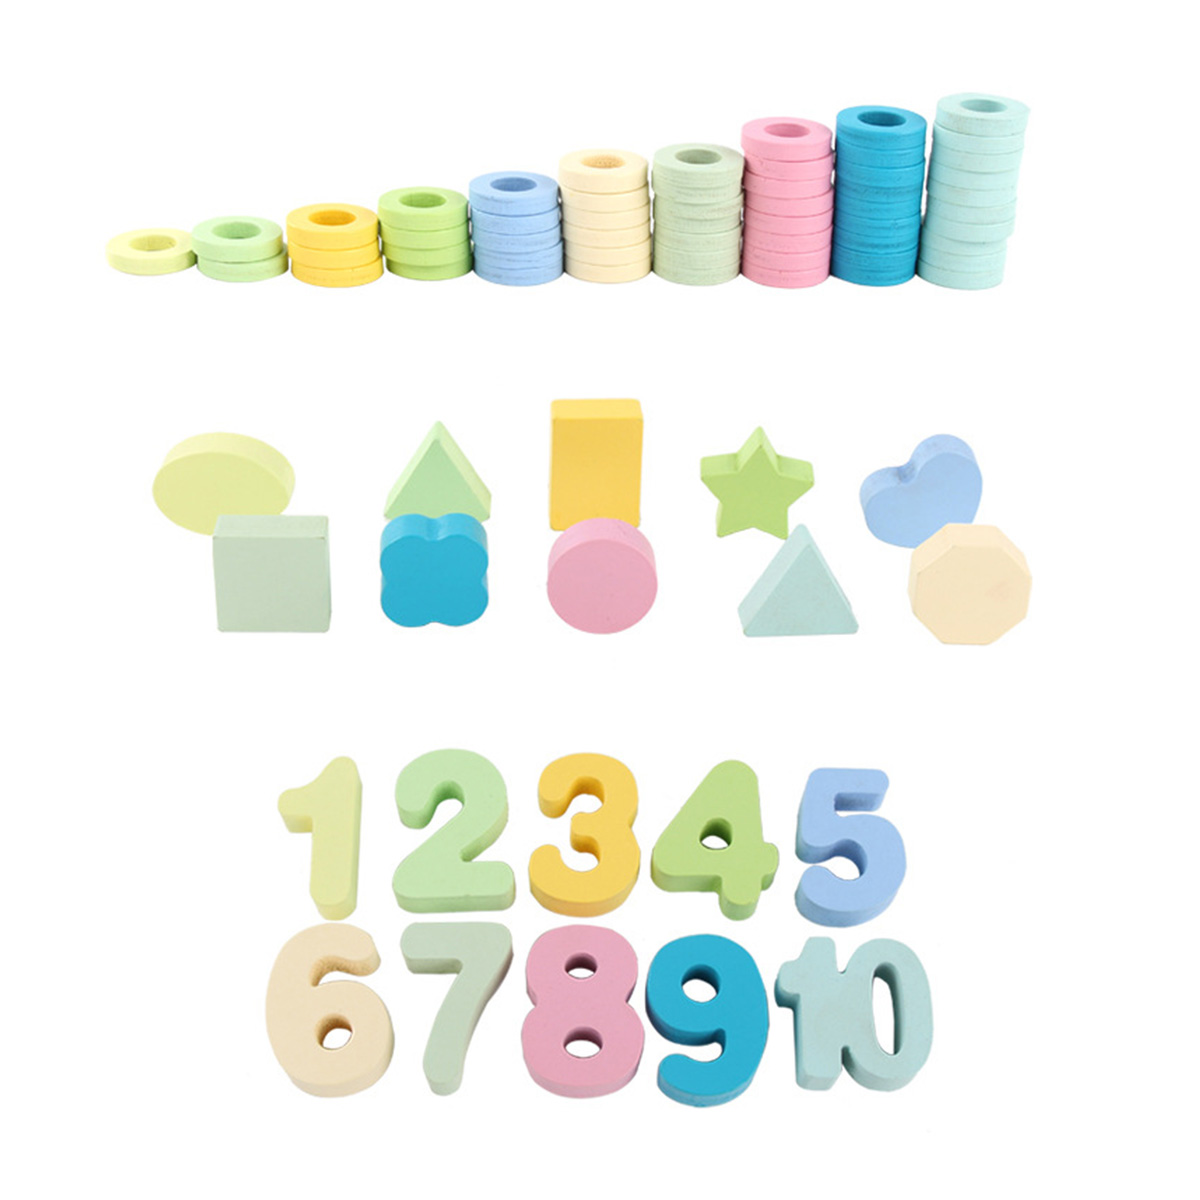 Preschool-Learning-for-Montessori-Math-Toys-Counting-Board-Digital-Shape-Pairing-1590390